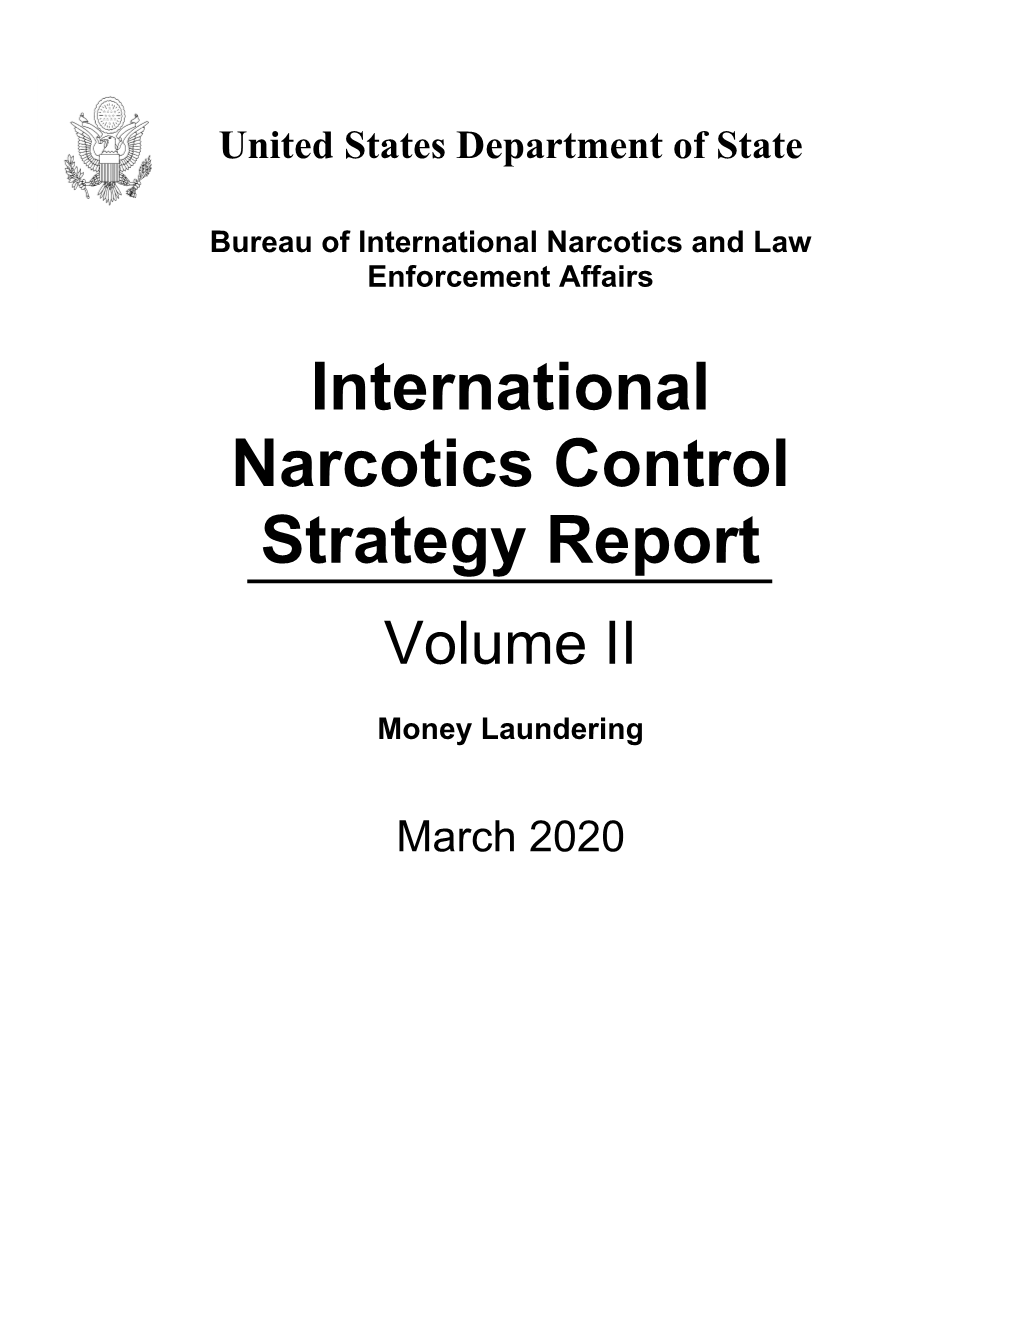 Volume II: Money Laundering” Focuses on the Exposure to This Threat in the Specific Context of Narcotics-Related Money Laundering